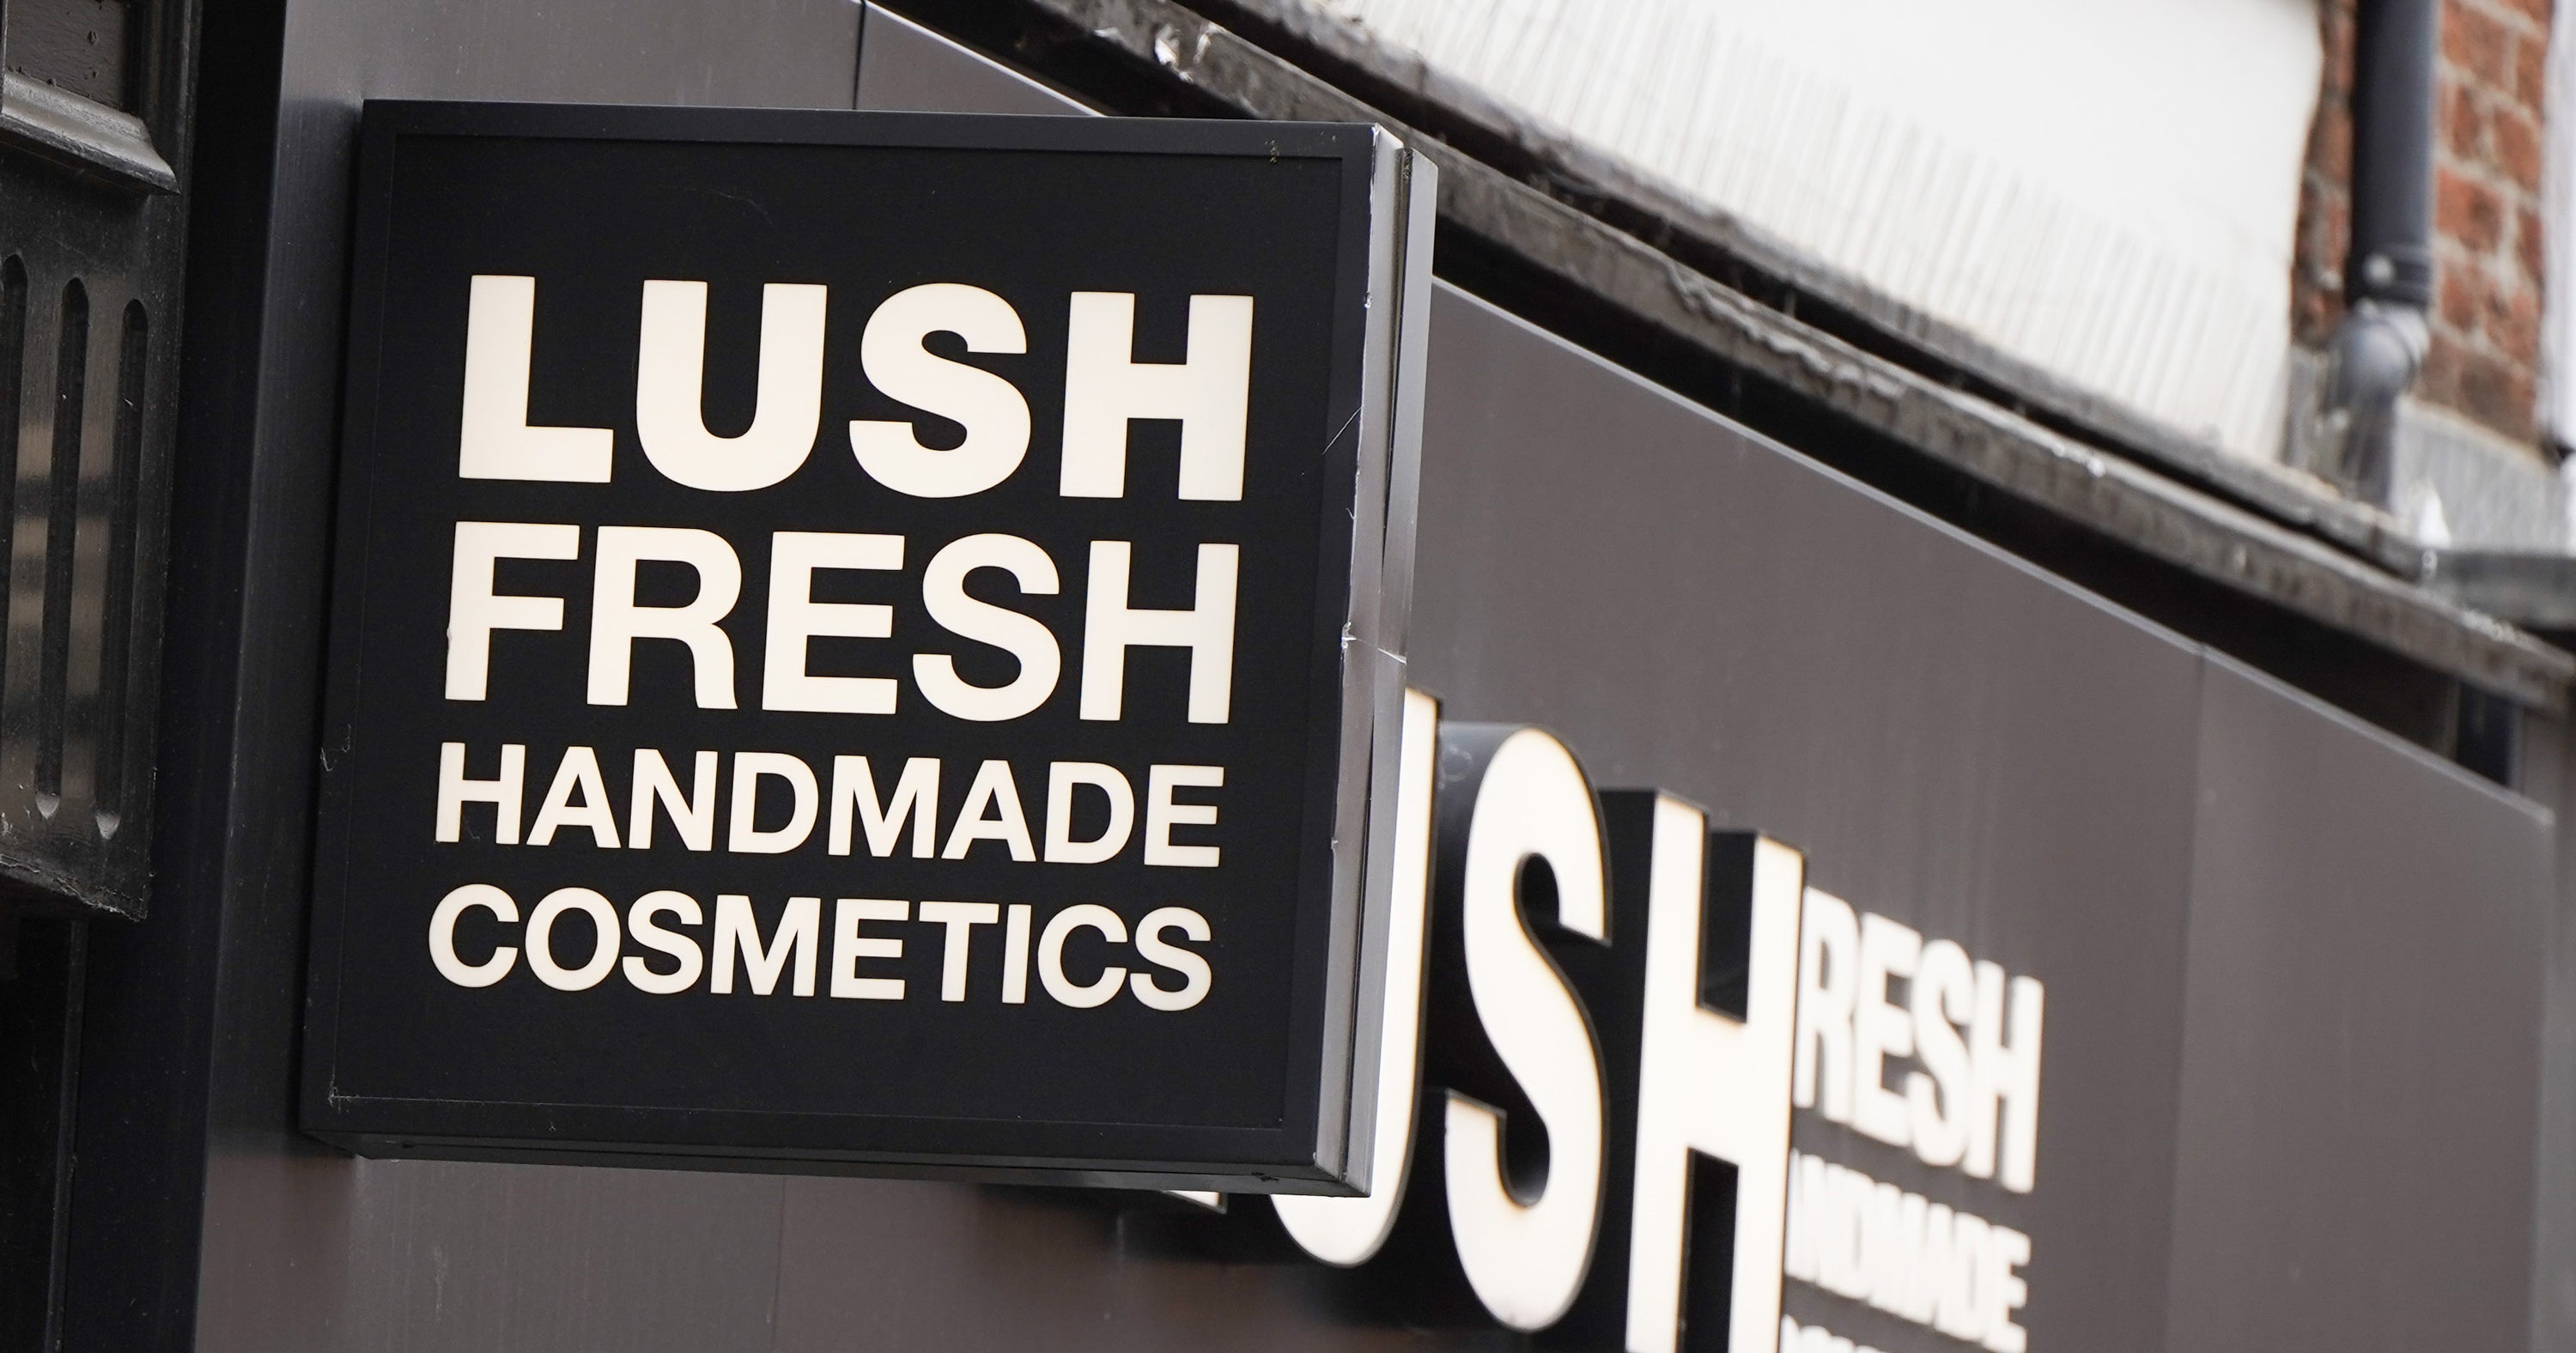 What Happened To Lush?